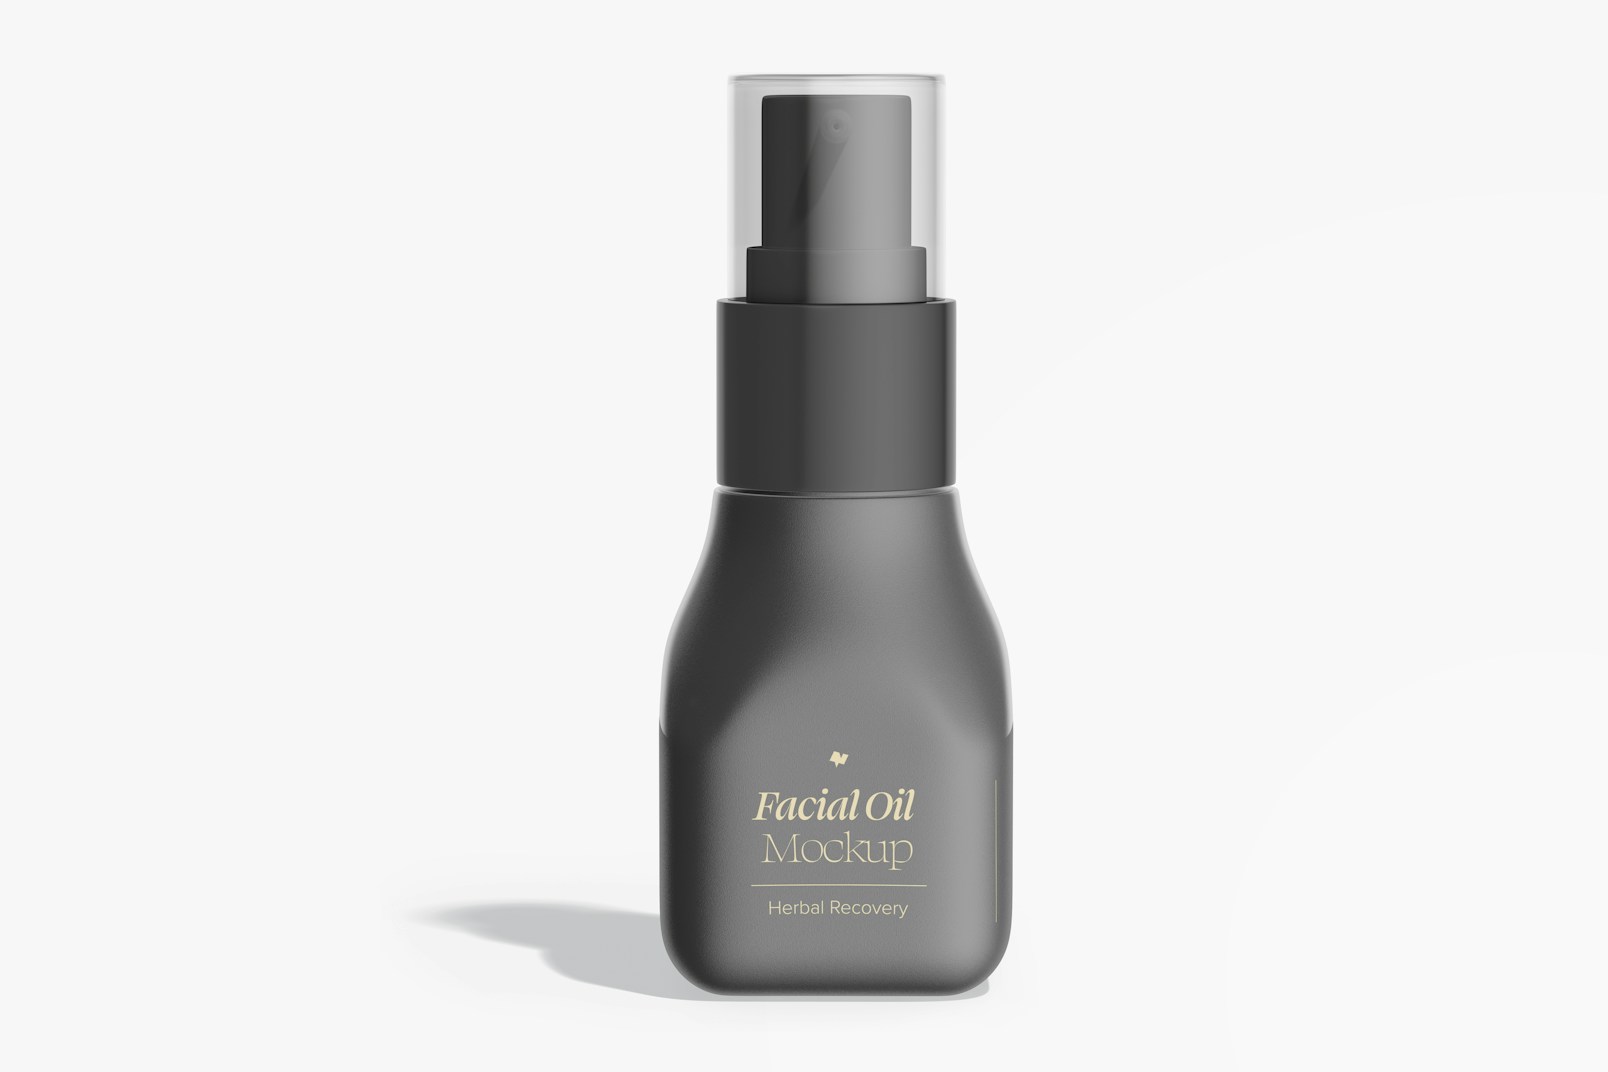 Small Facial Oil Bottle Mockup, Front View